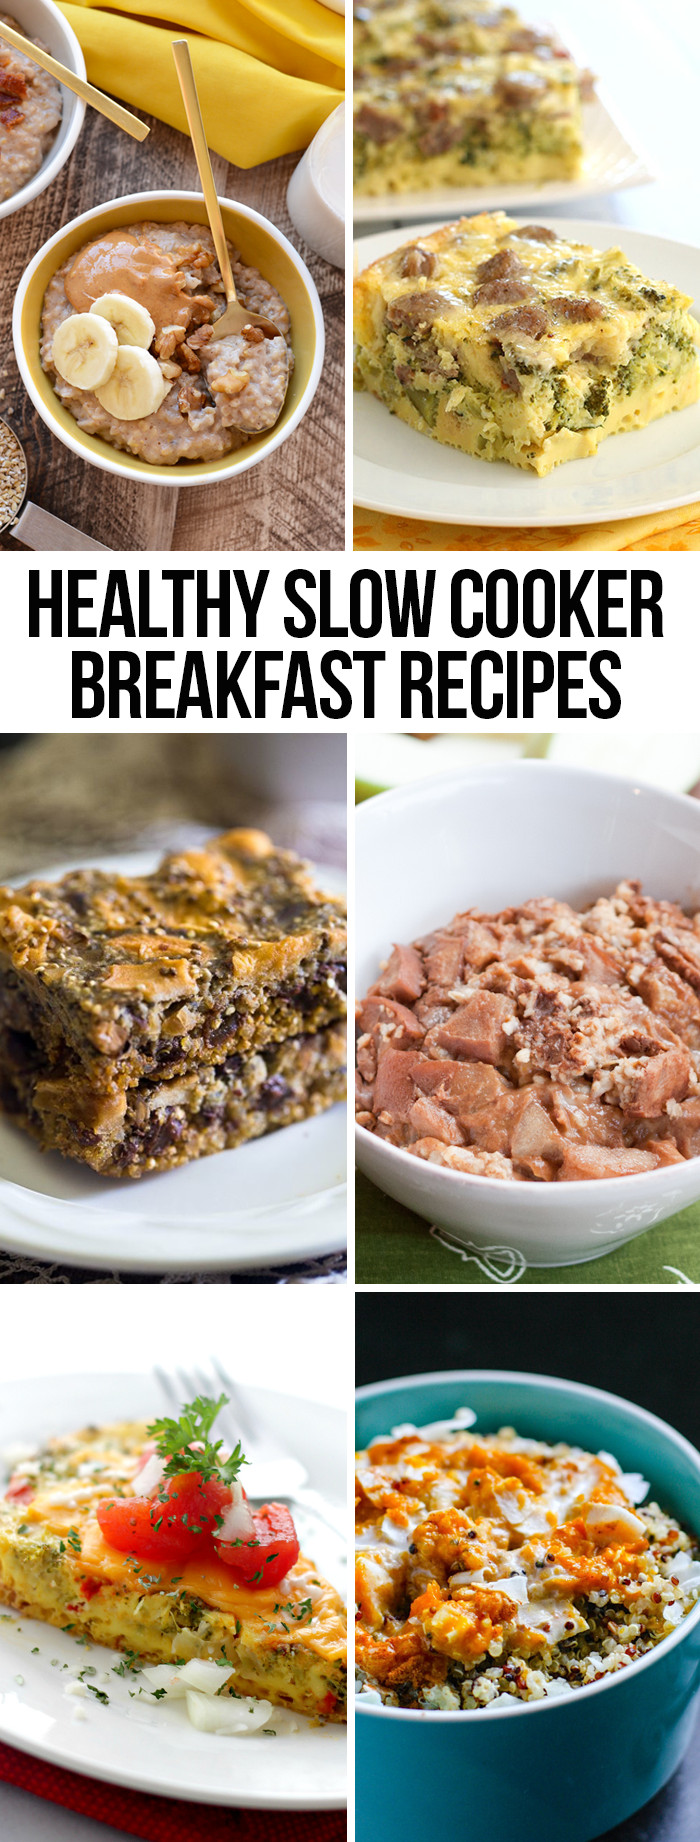 Best Healthy Slow Cooker Recipes 20 Ideas for Healthy Slow Cooker Breakfast Recipes